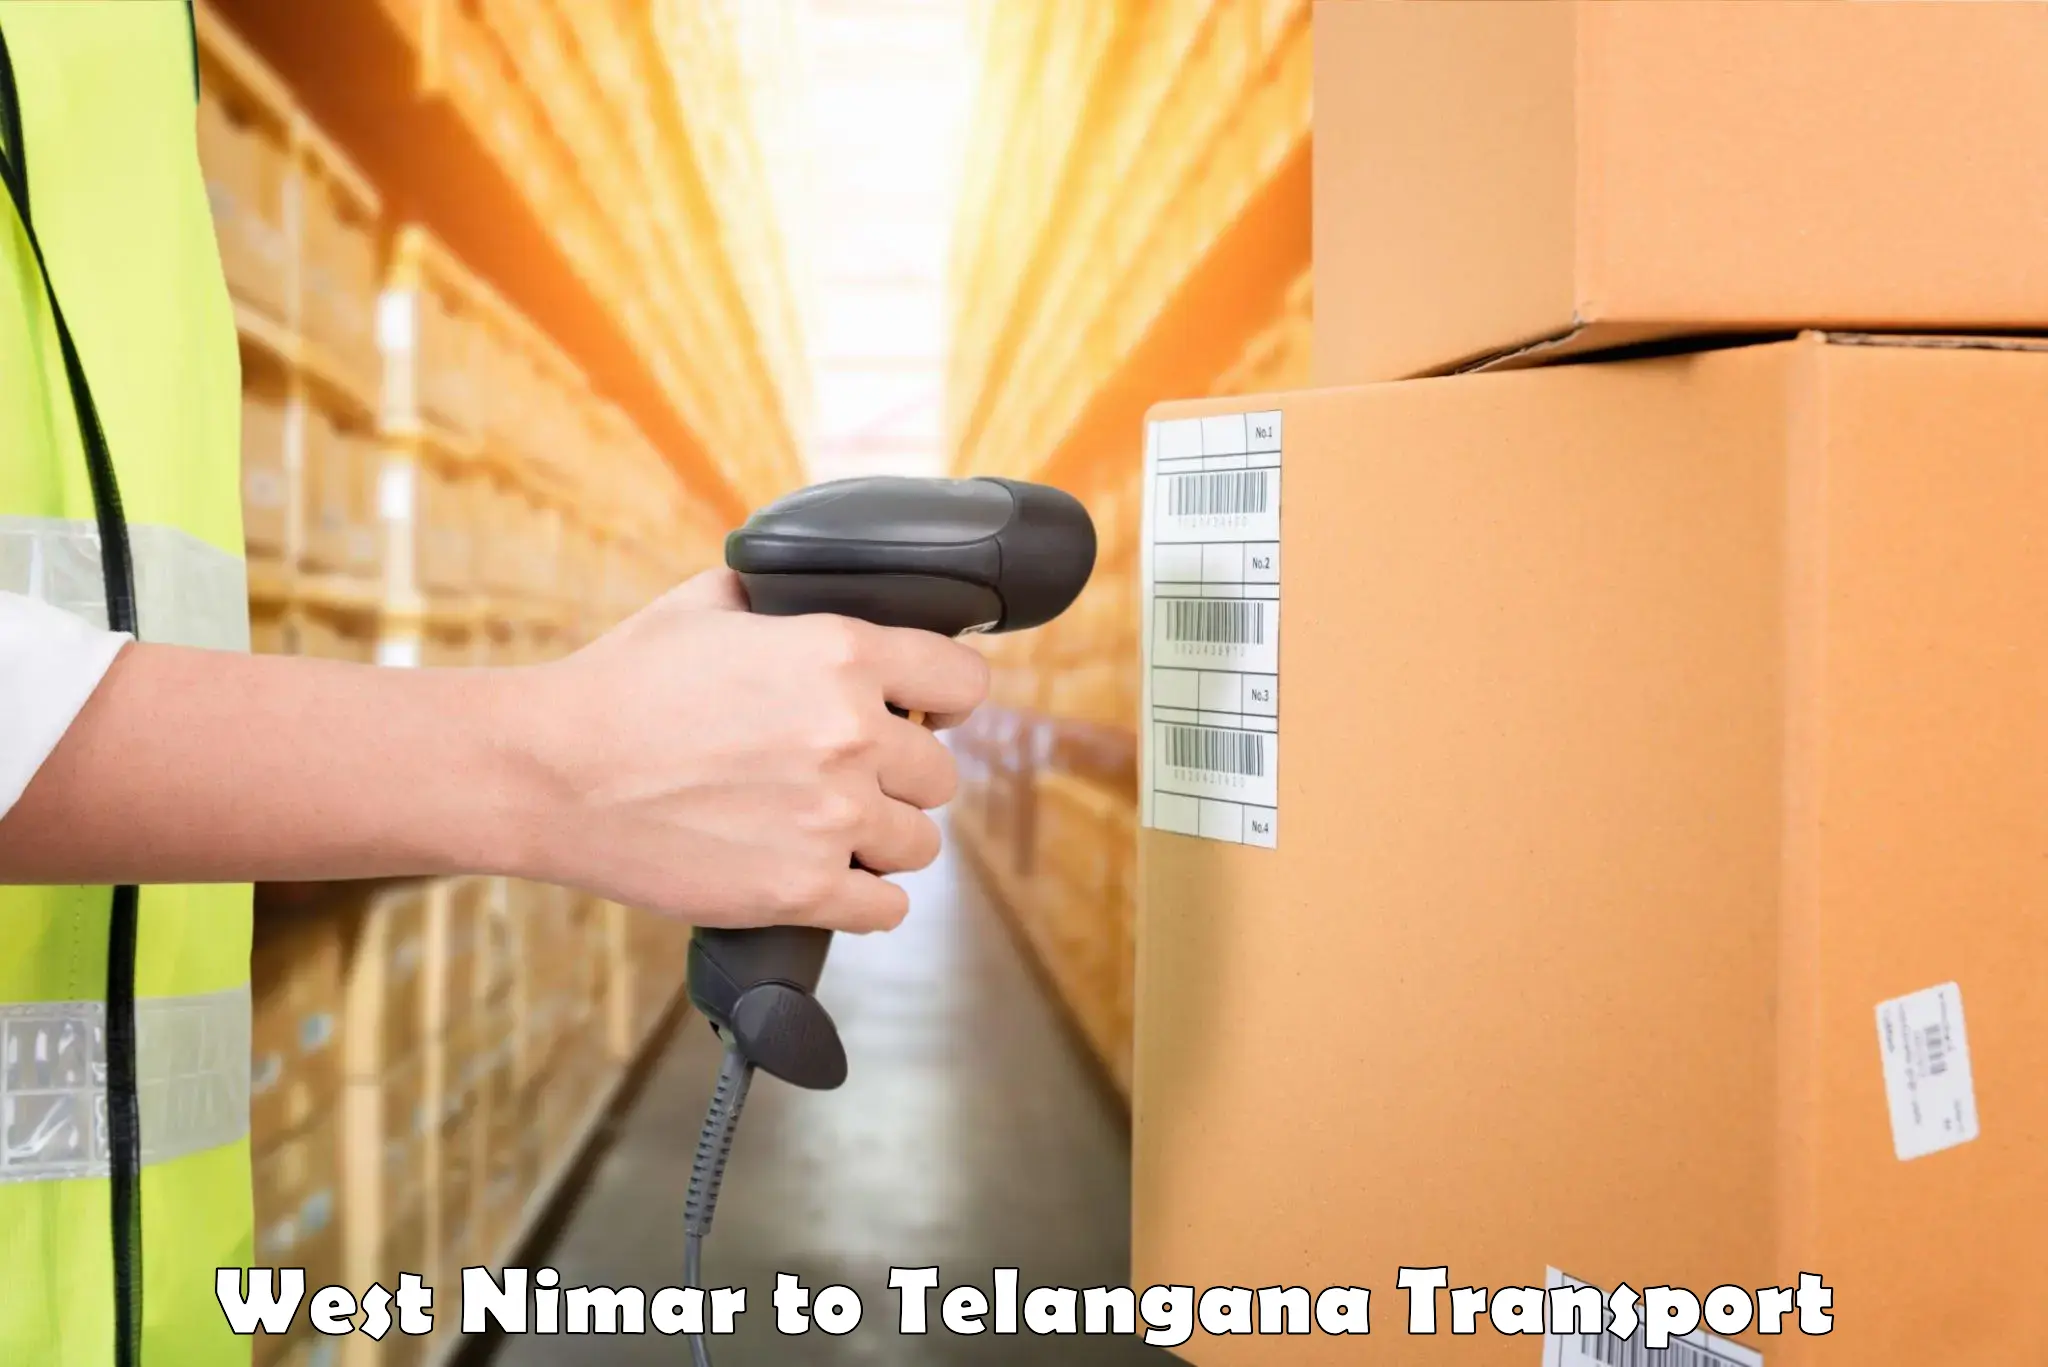 Container transport service West Nimar to Hajipur Mancherial